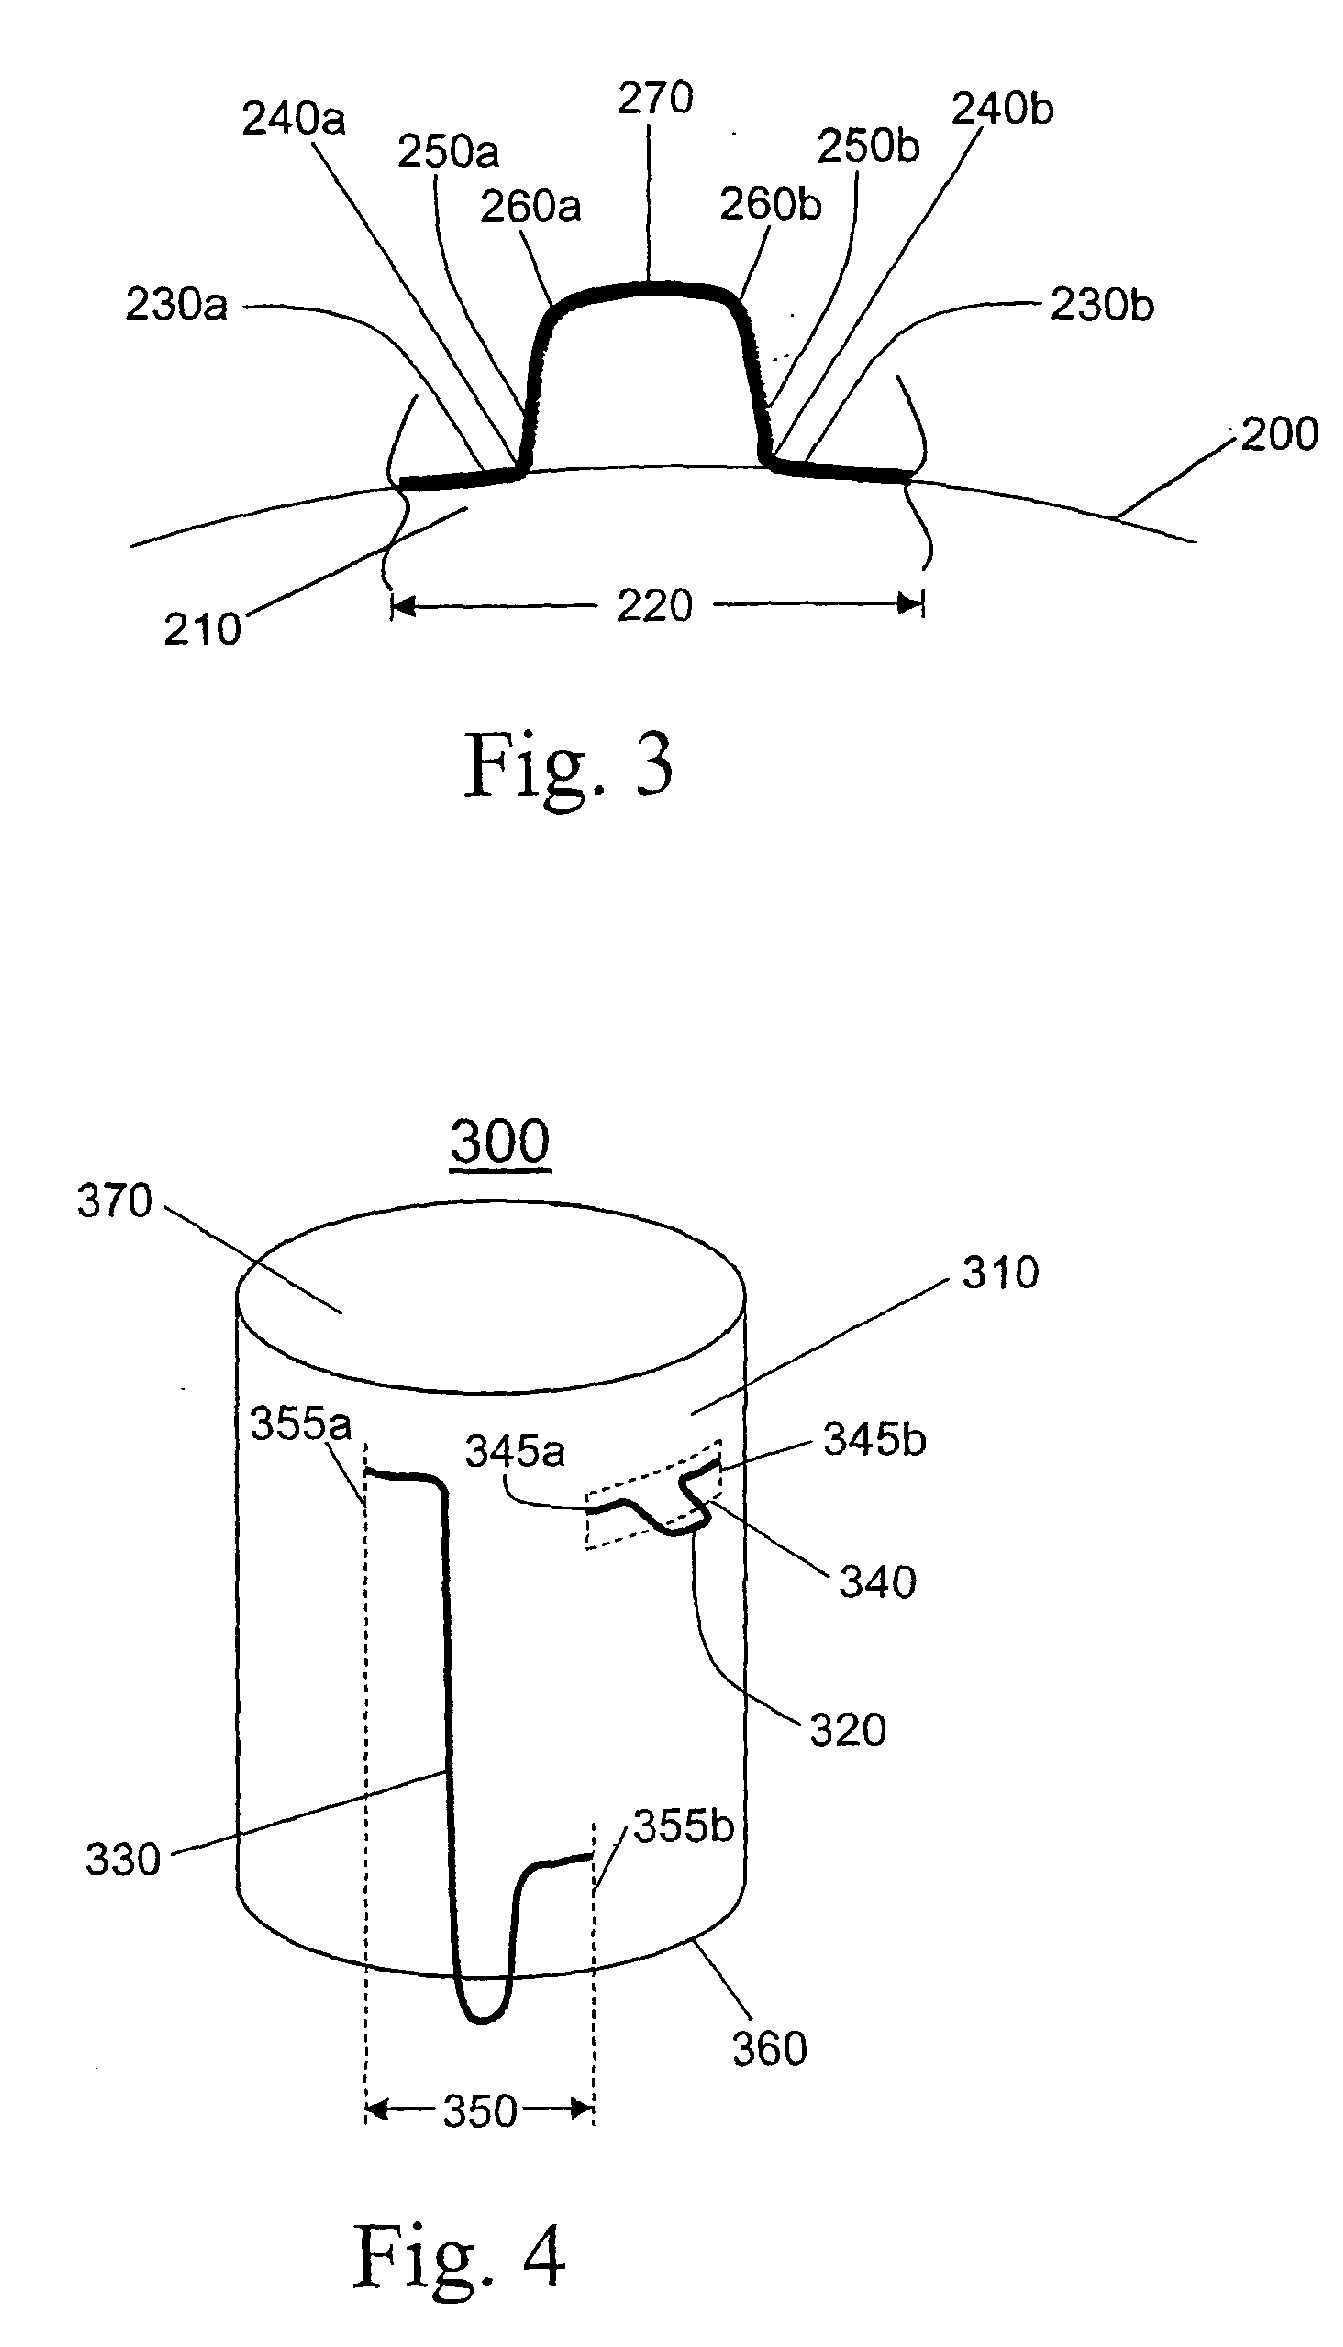 Electric component with winding and tapping